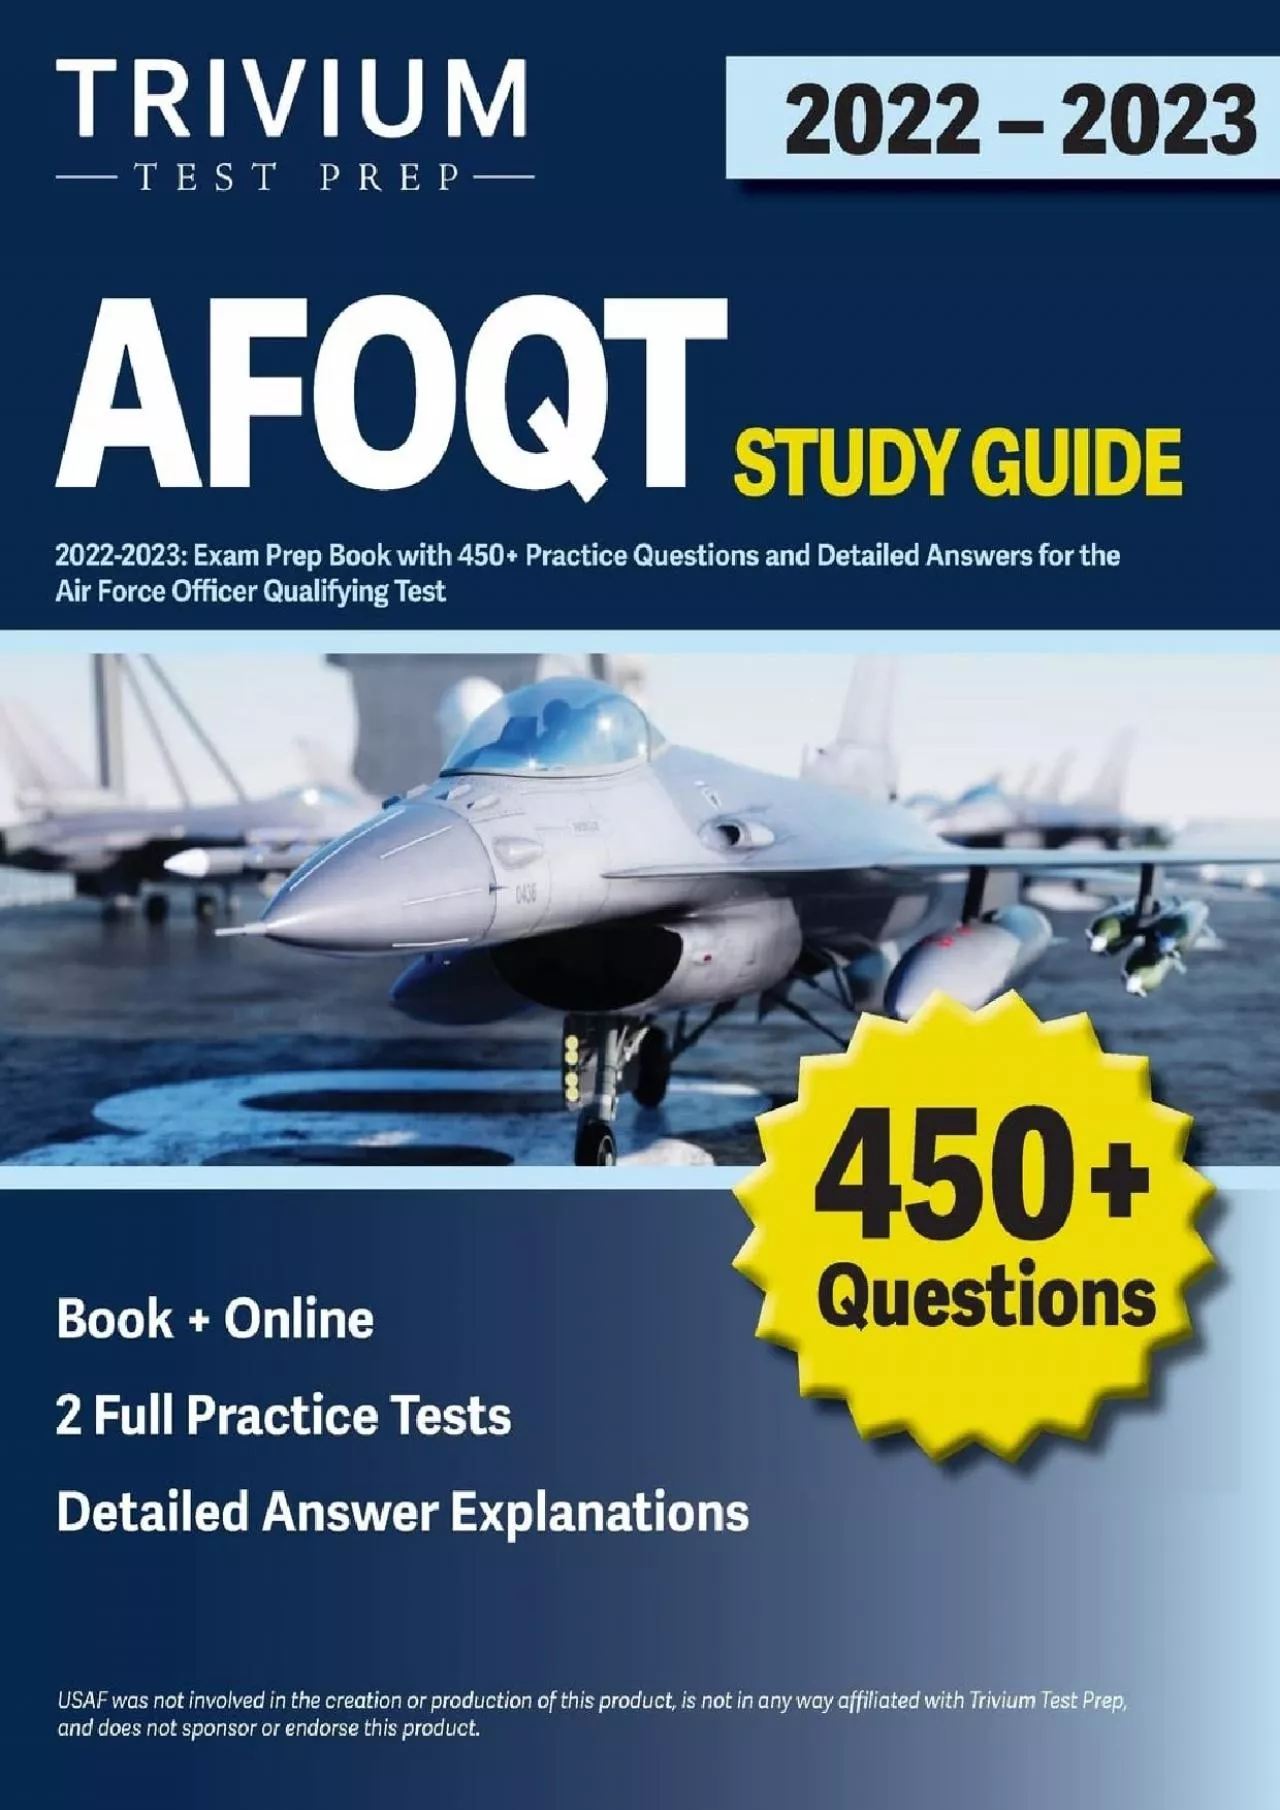 [READ] AFOQT Study Guide 2022-2023: Exam Prep Book with 450+ Practice Questions and Detailed